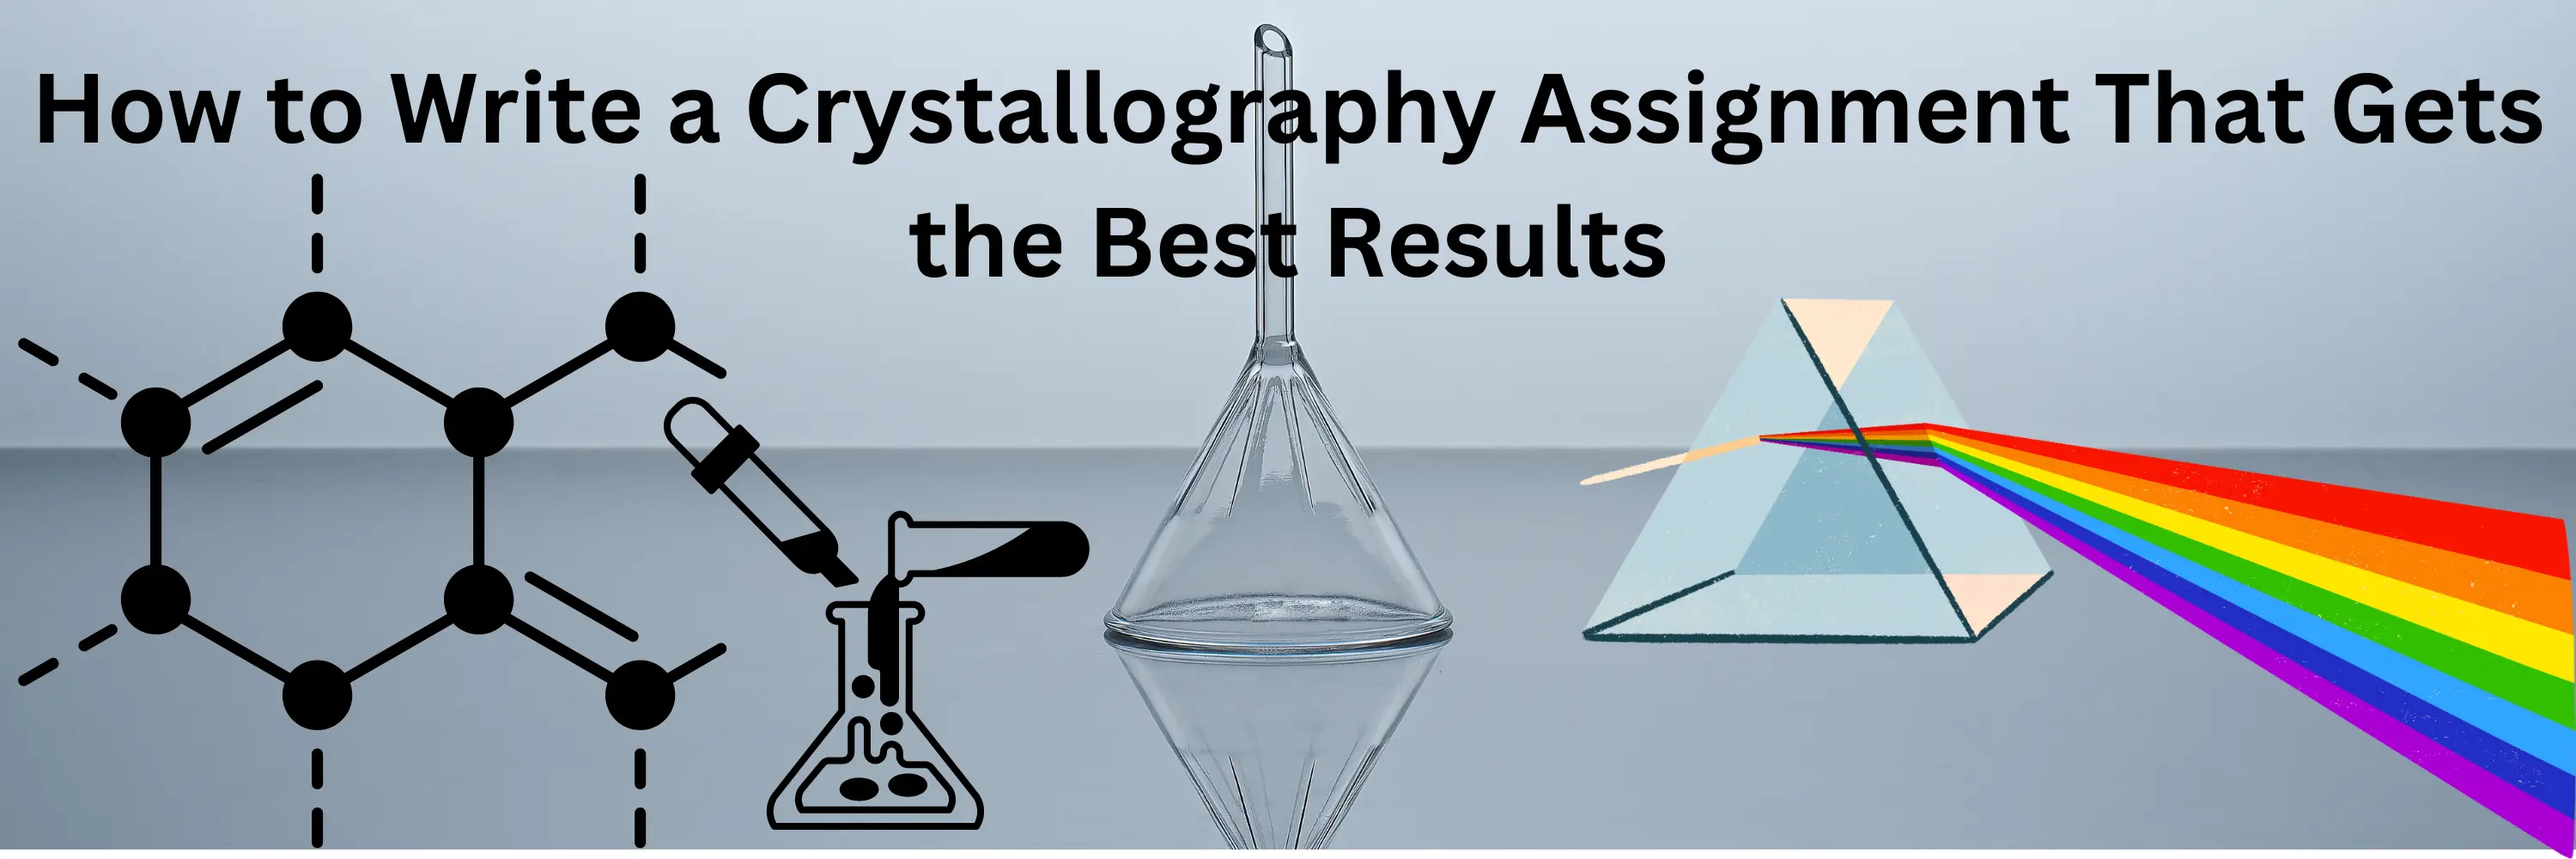 How to Write a Crystallography Assignment That Gets the Best Results